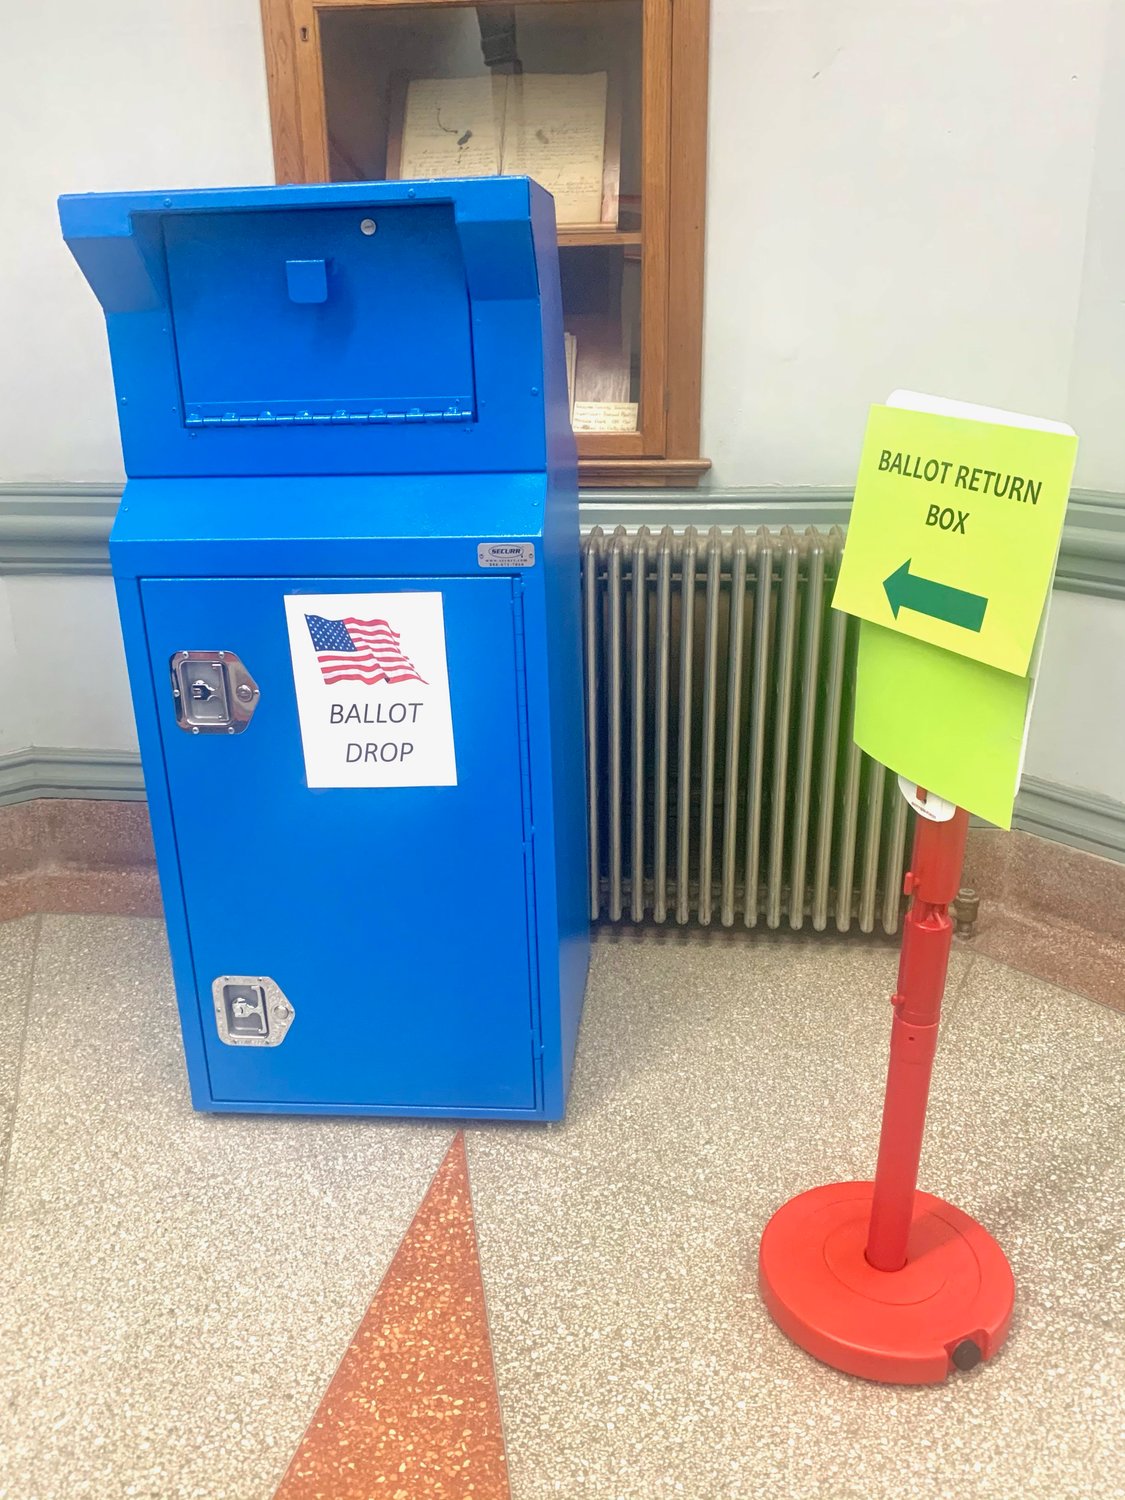 The ballot drop box from last year's election will be returning to the Wayne County Courthouse for this year's municipal elections.